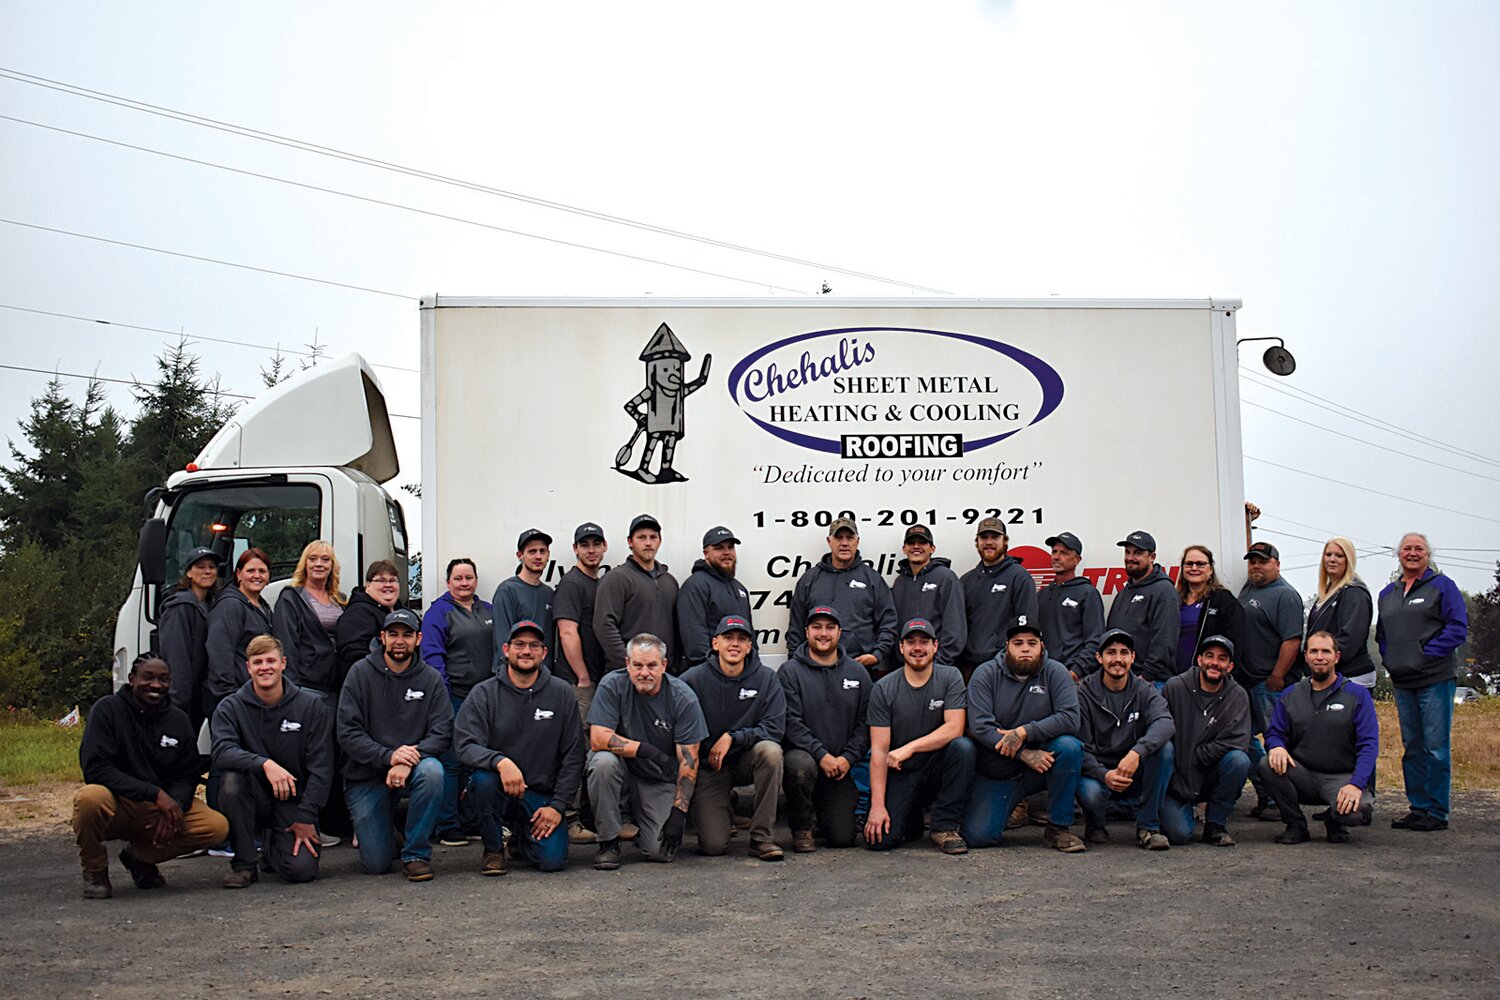 Employees of Chehalis Sheet Metal pose in front of the company's Chehalis location in this photo provided by the company. The company will give away a new heating and cooling system, valued at more than $5,000, to a family in need later this year.